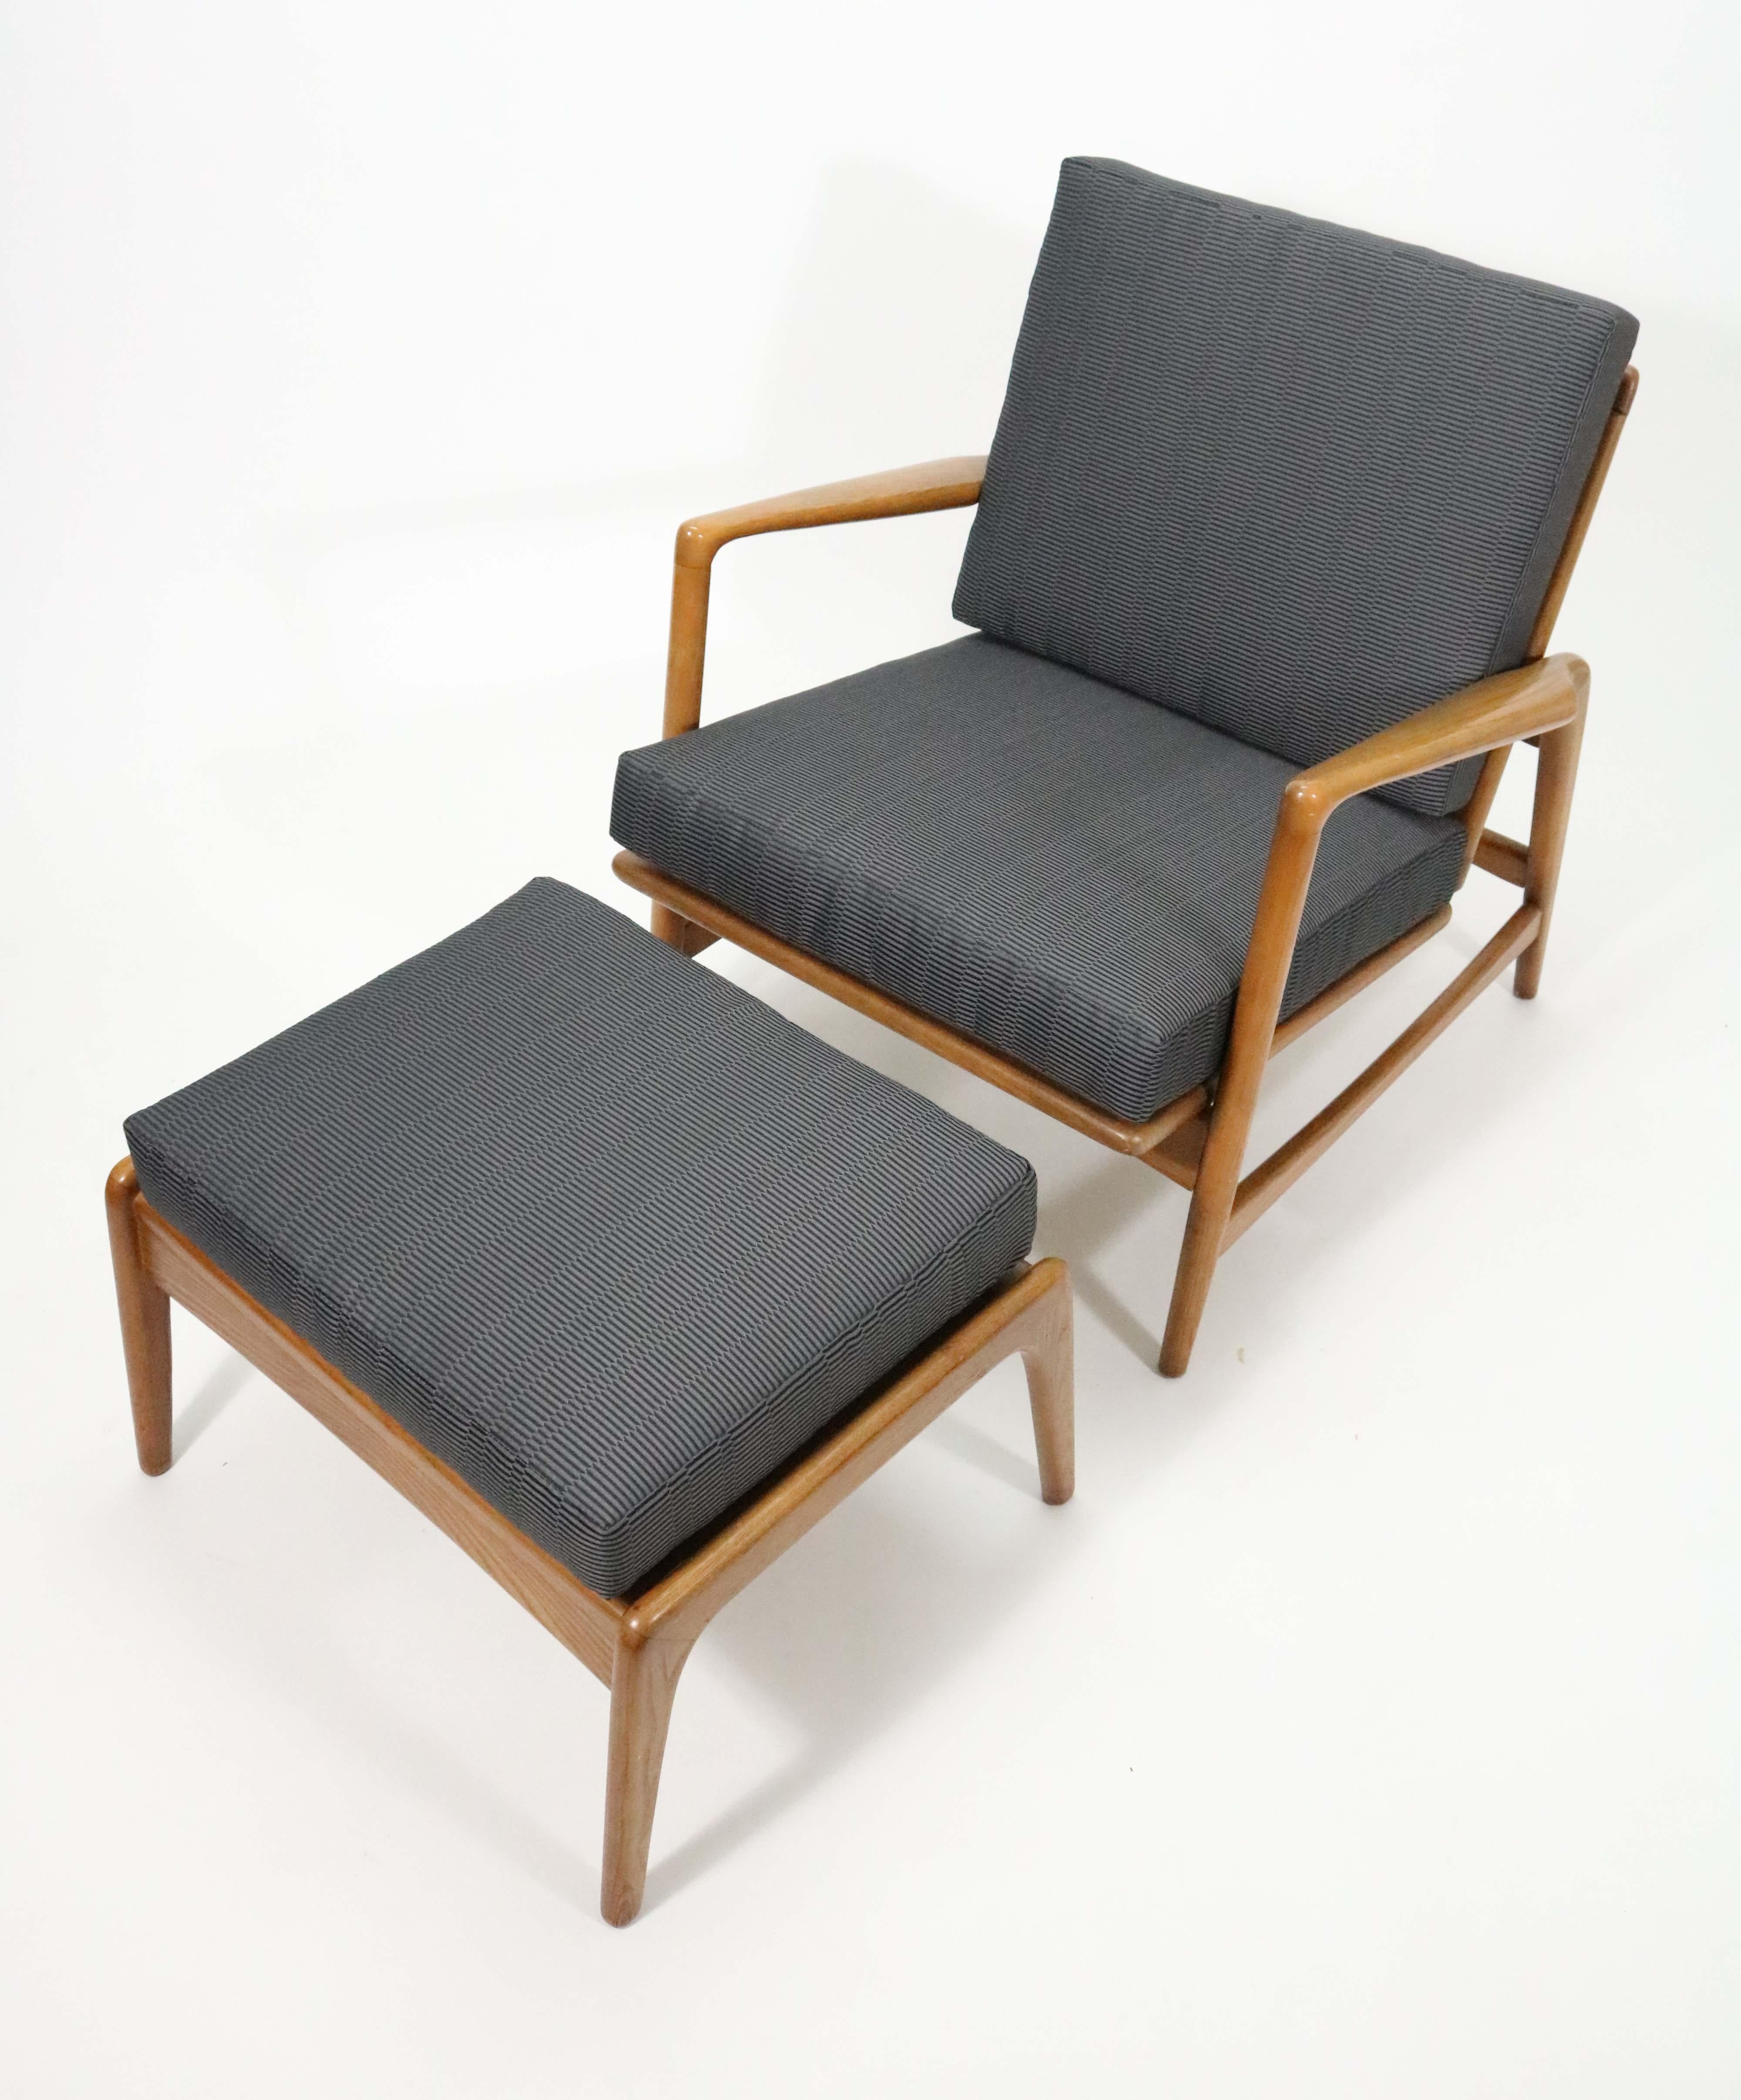 American Kofod-Larsen Style Walnut Lounge Chair and Ottoman with Adjustable Recline